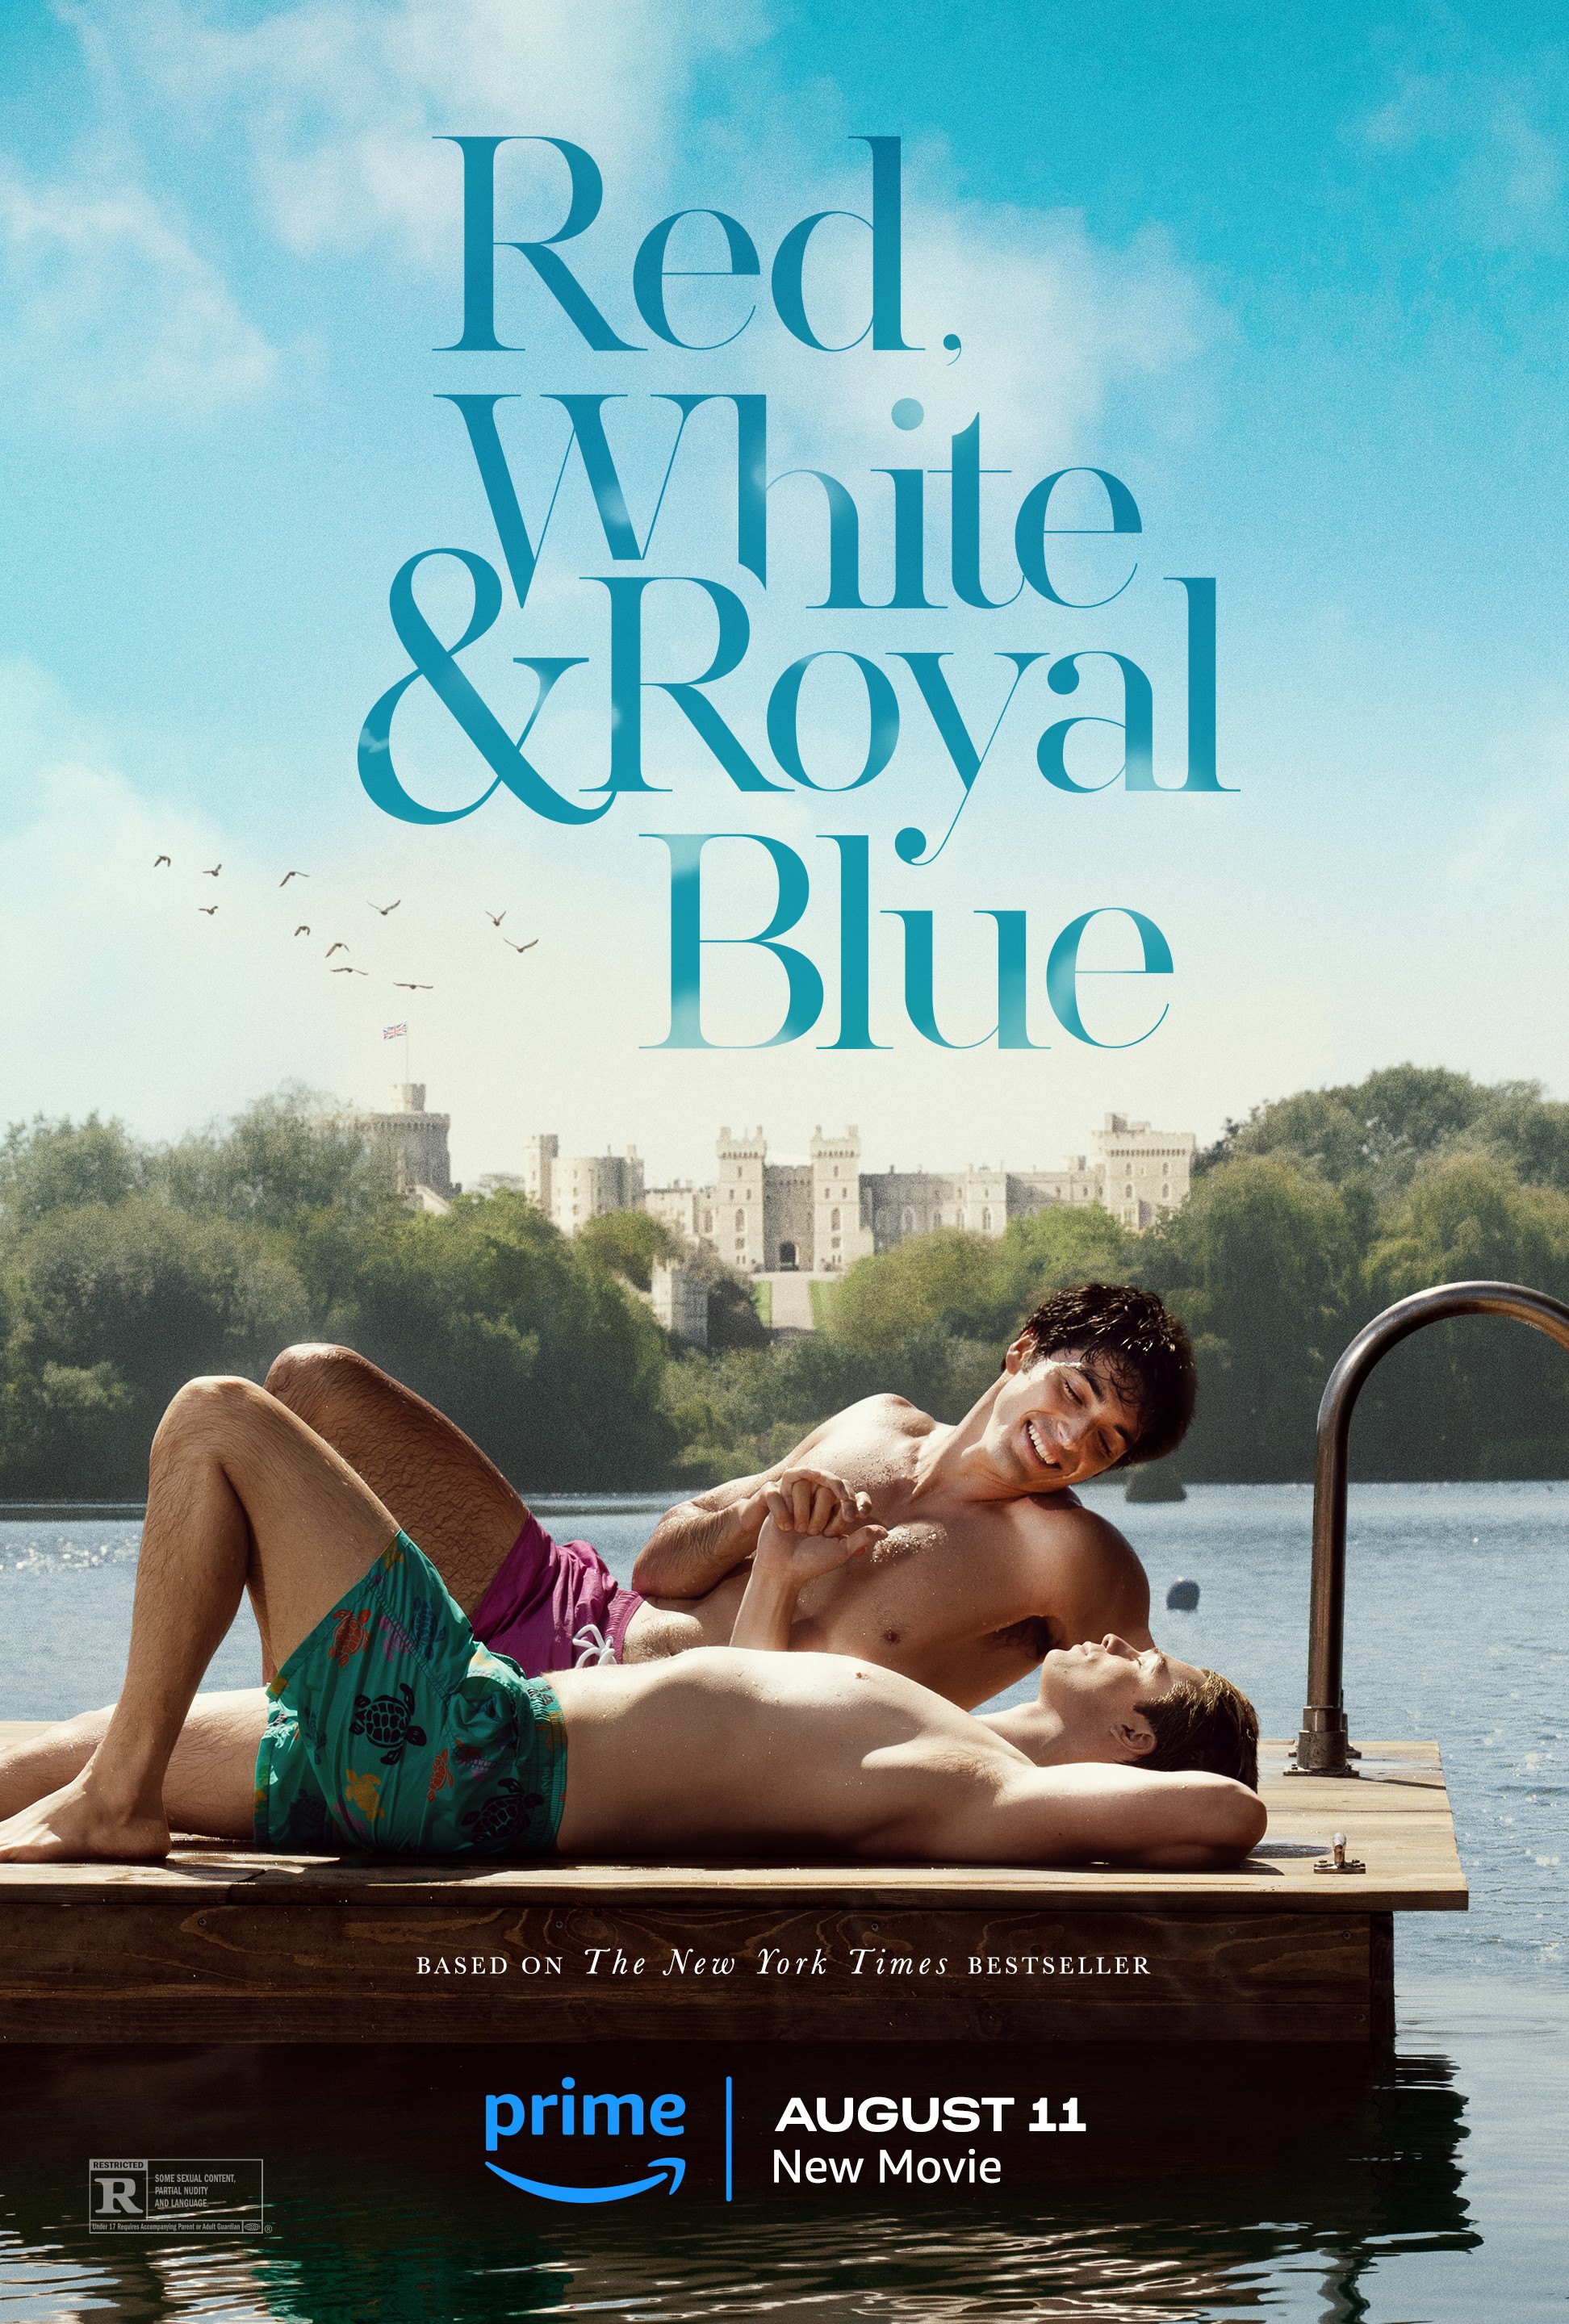 Very Very Hot Sexy Blue Film English - Red, White & Royal Blue | Rotten Tomatoes